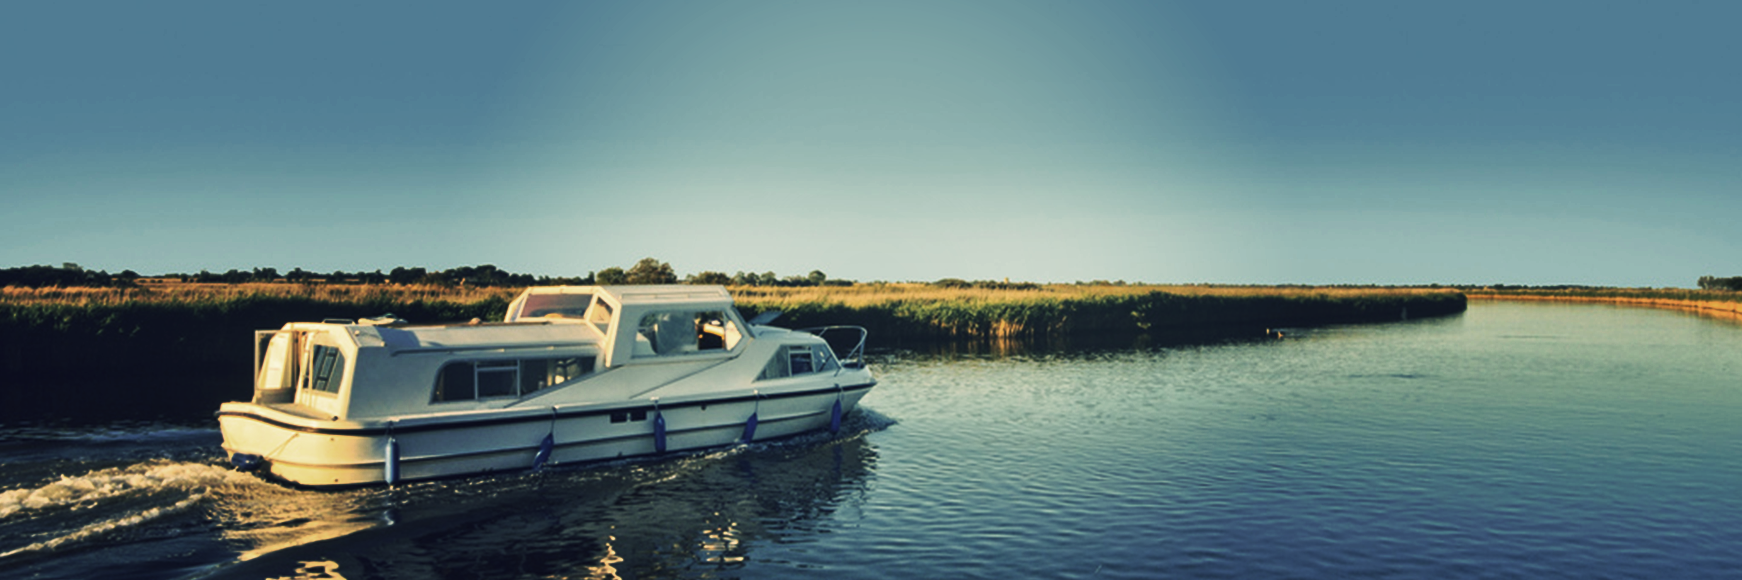 Boating in the Broads: An introduction banner image